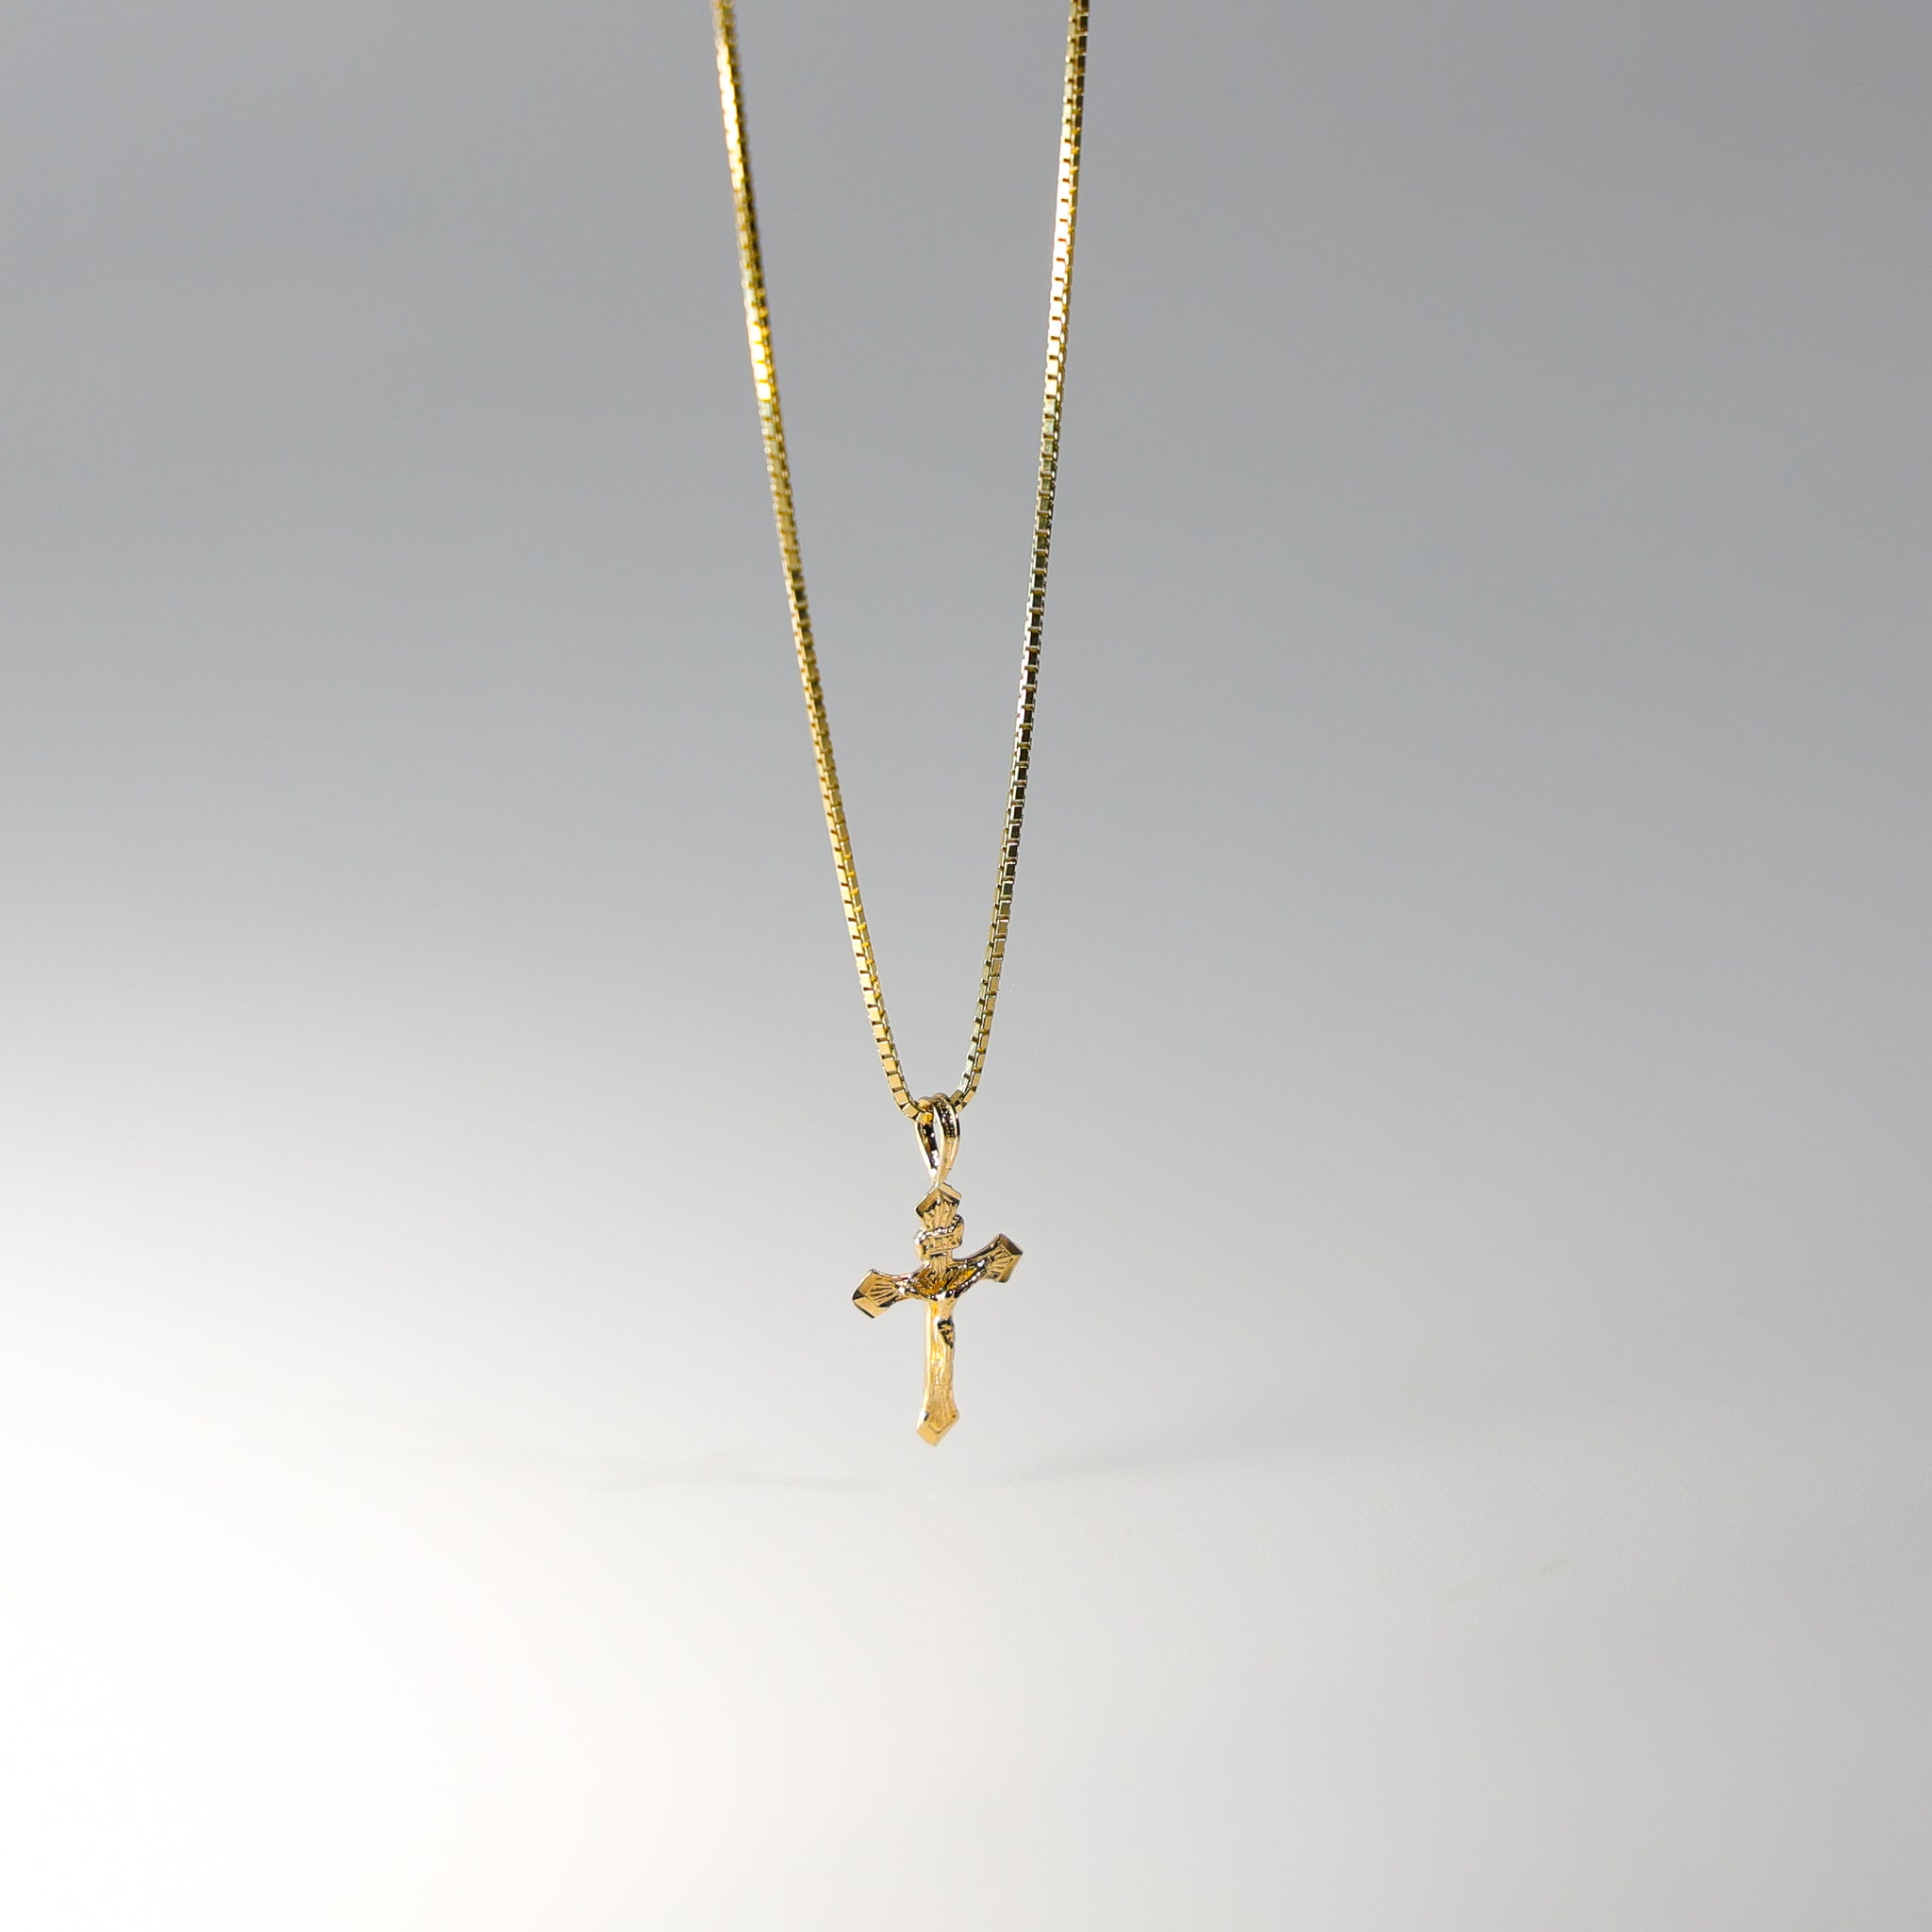 Gold Crucifix Cross Religious Pendant Model-1008 - Charlie & Co. Jewelry